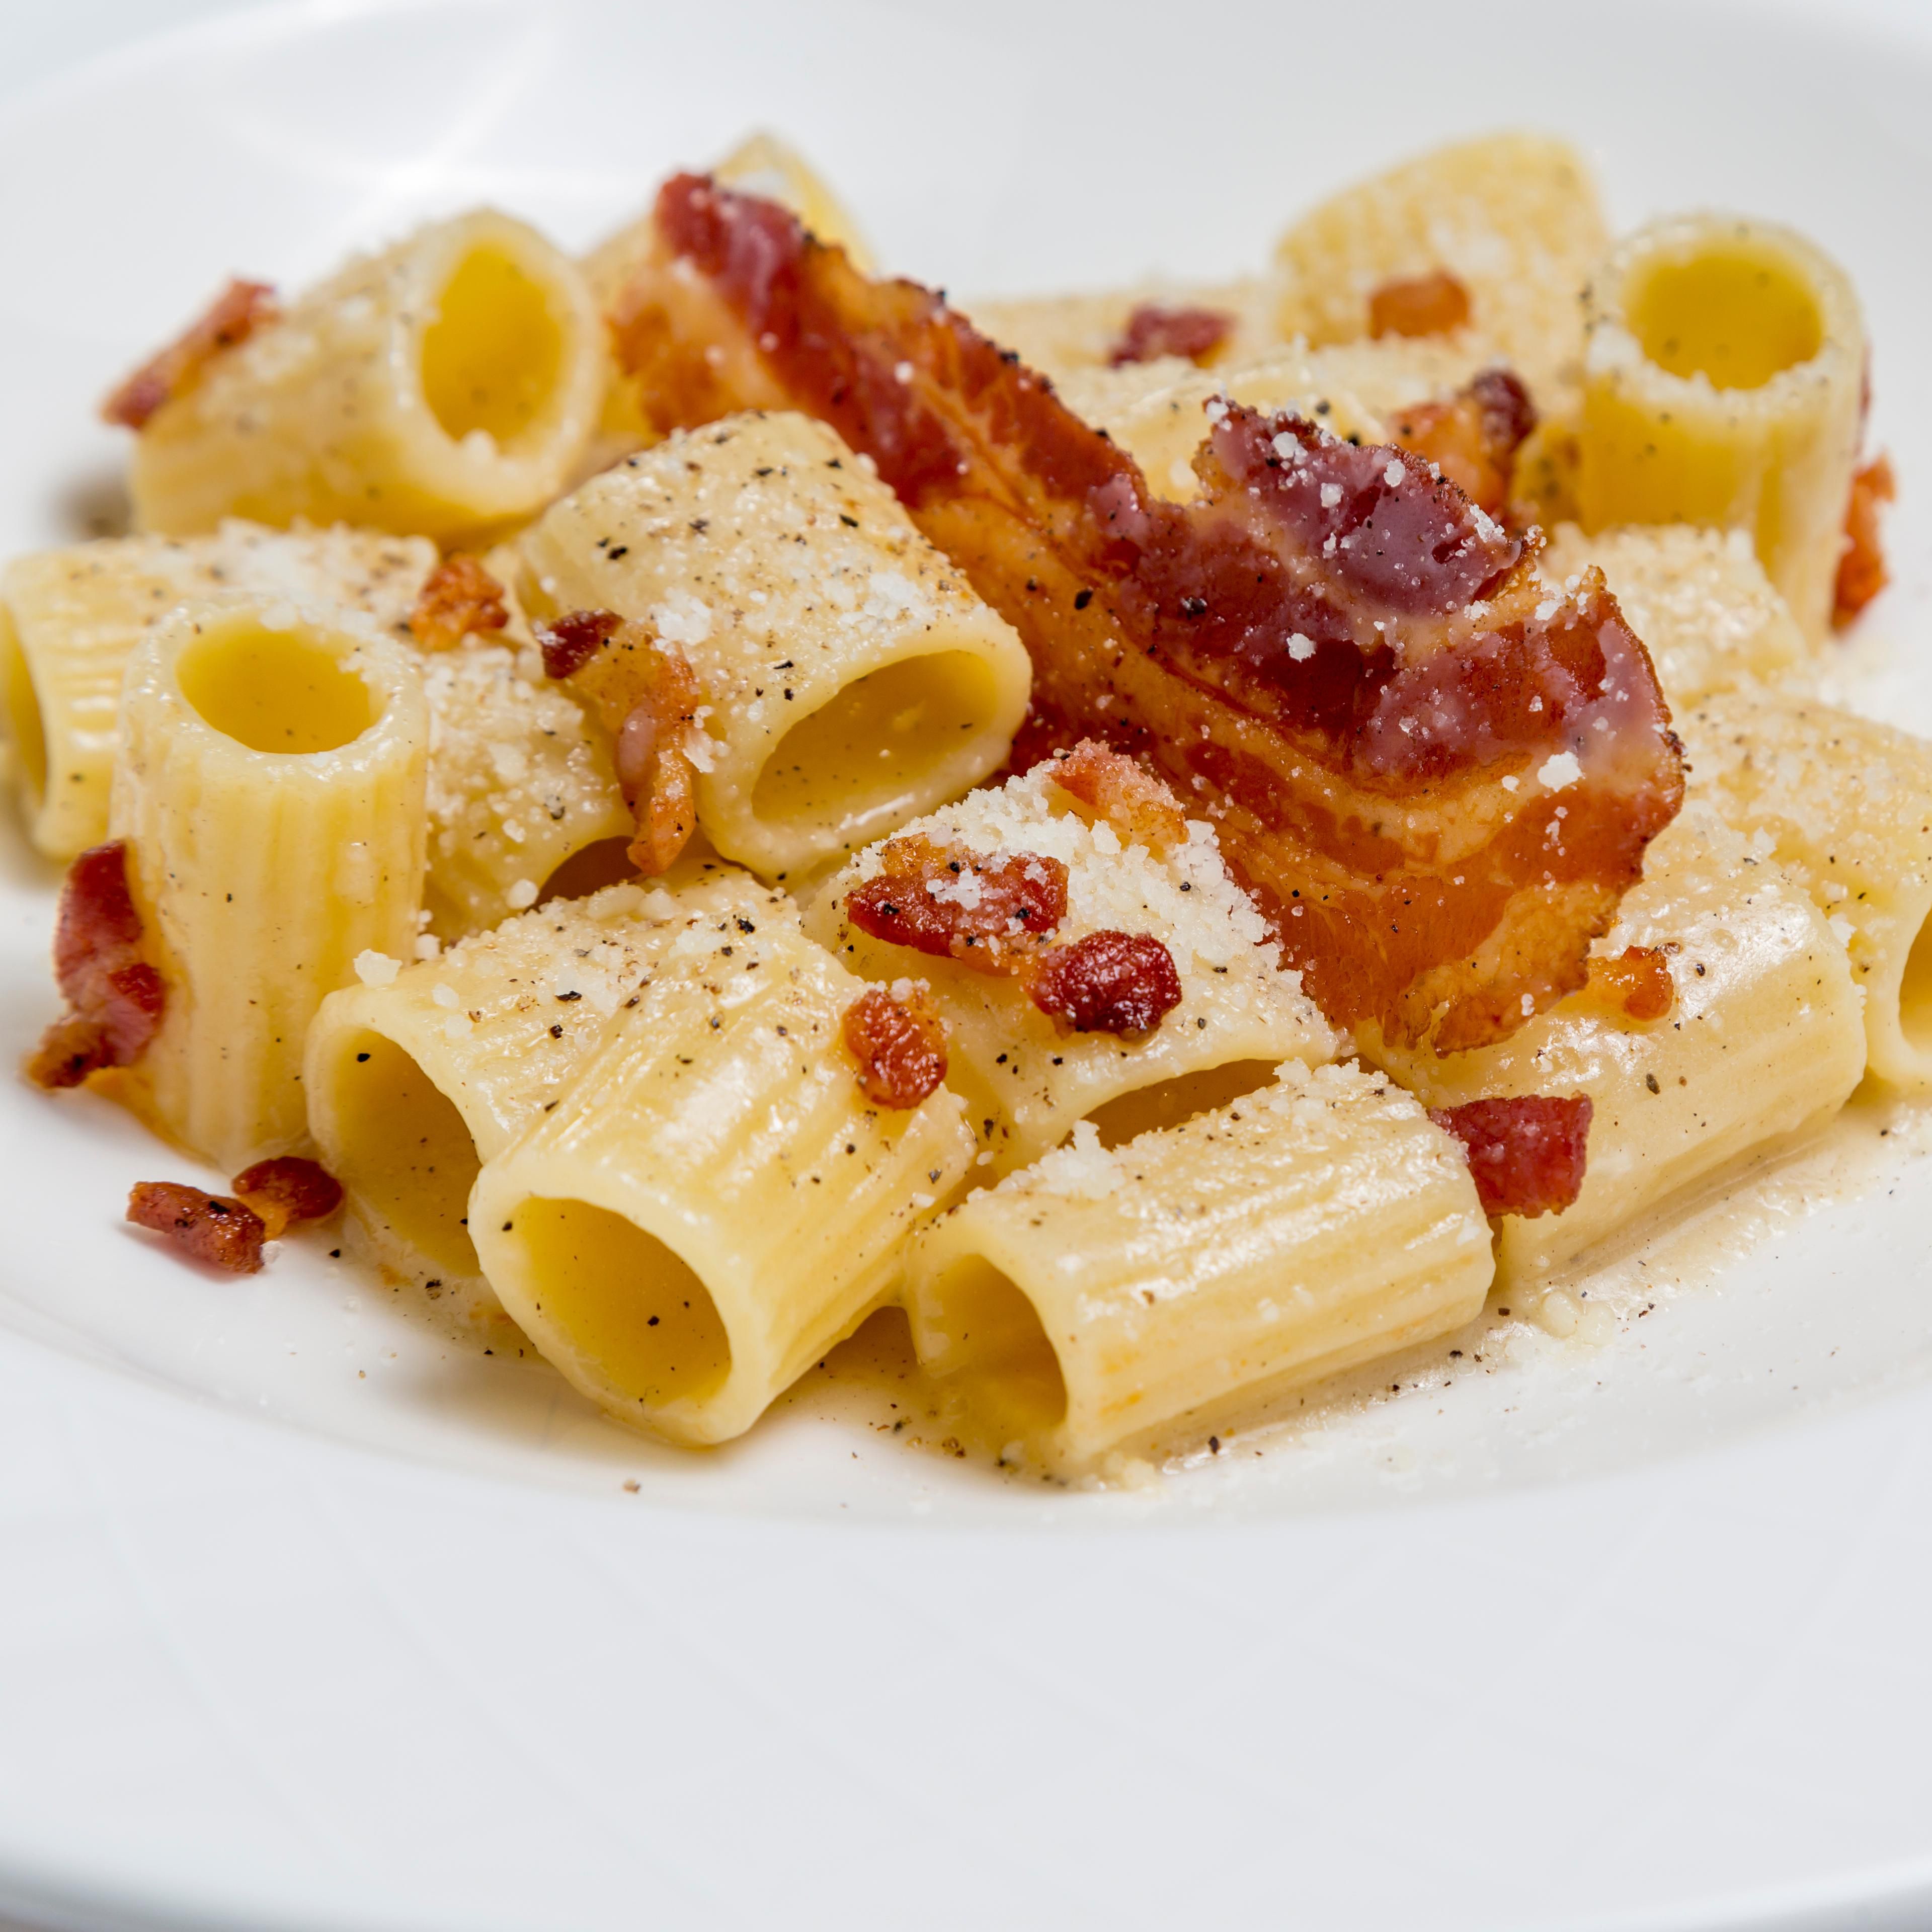 Gricia: Short pasta with bacon